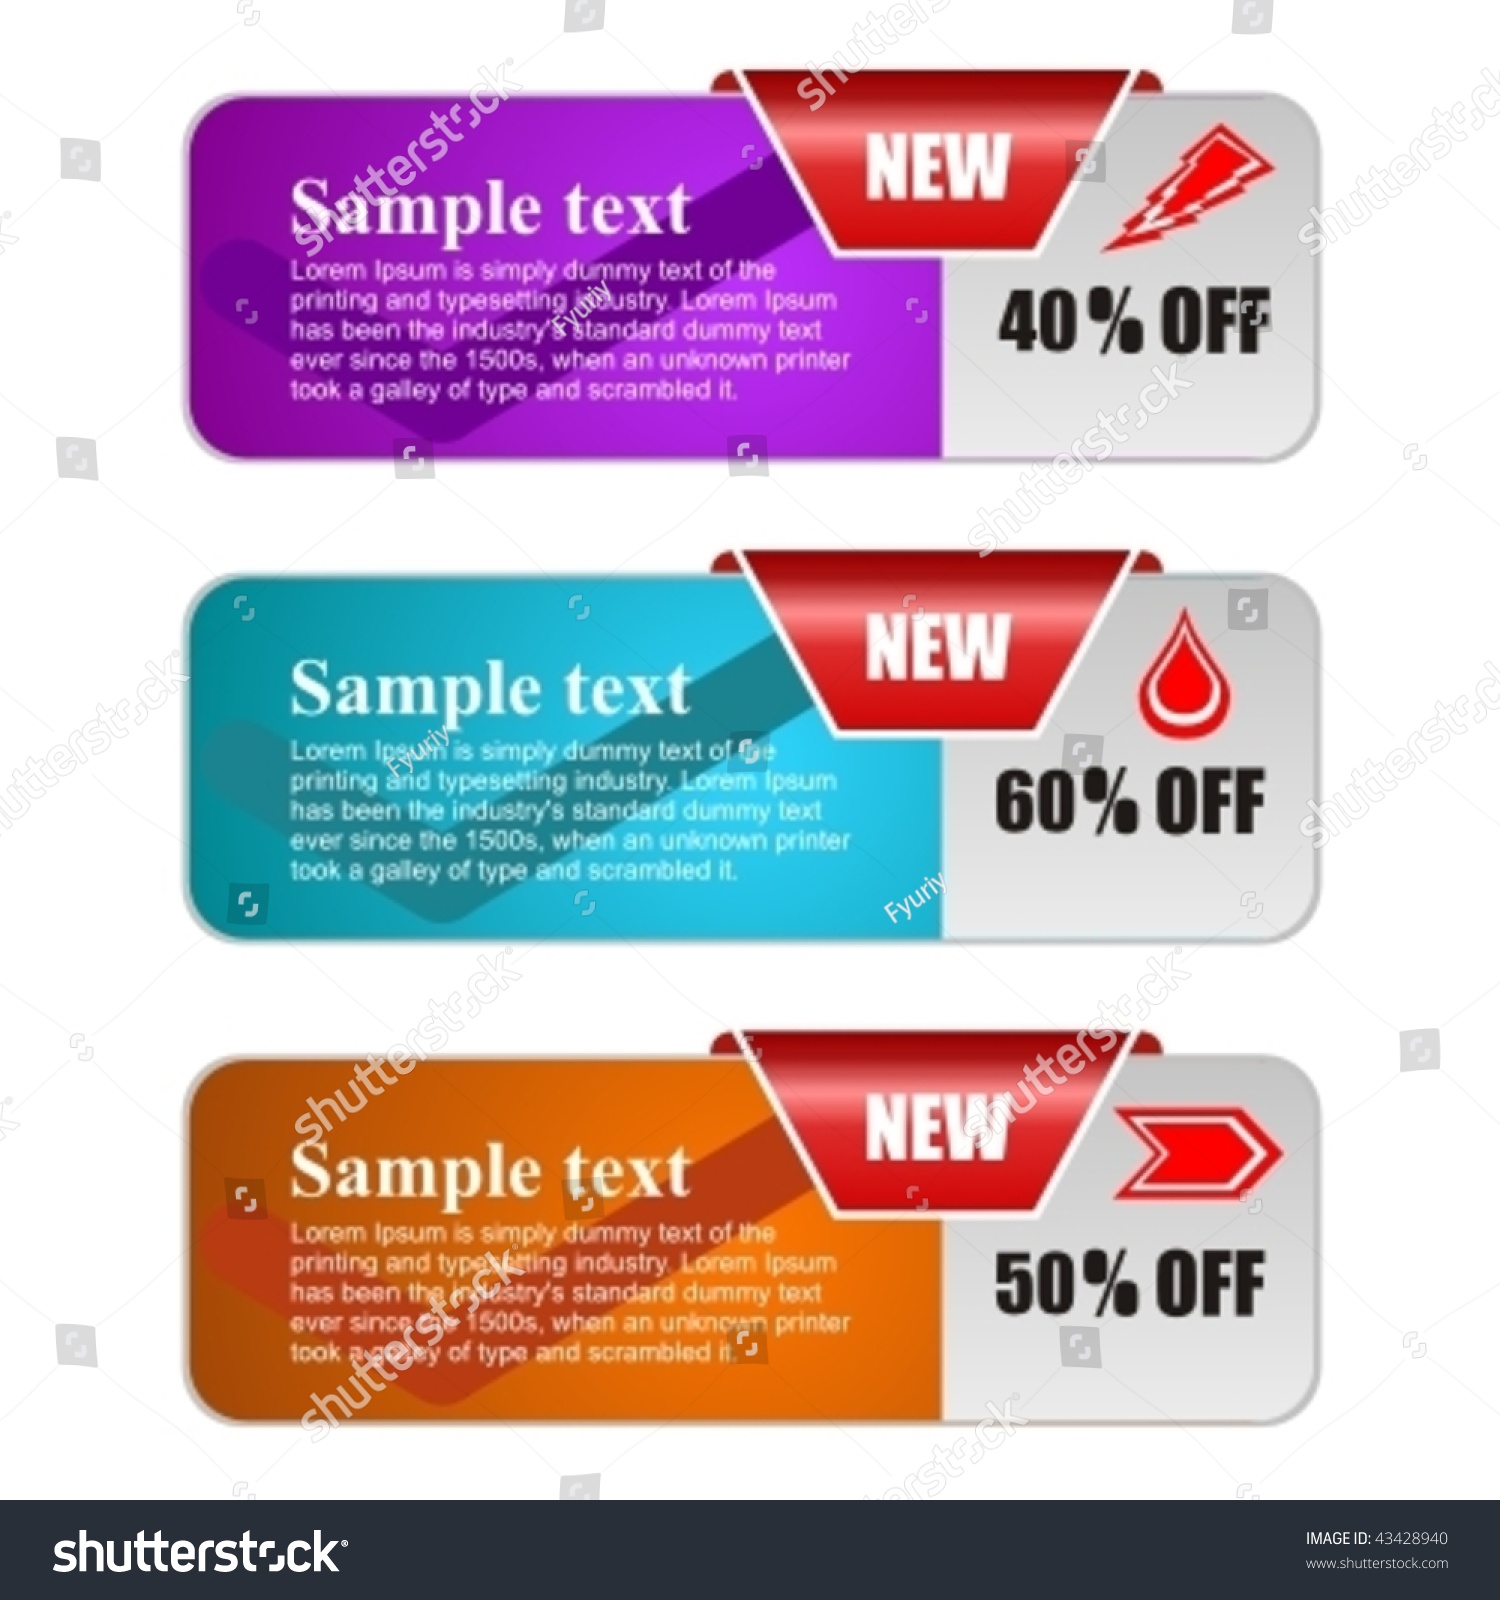 Vector Banners For Web - 43428940 : Shutterstock